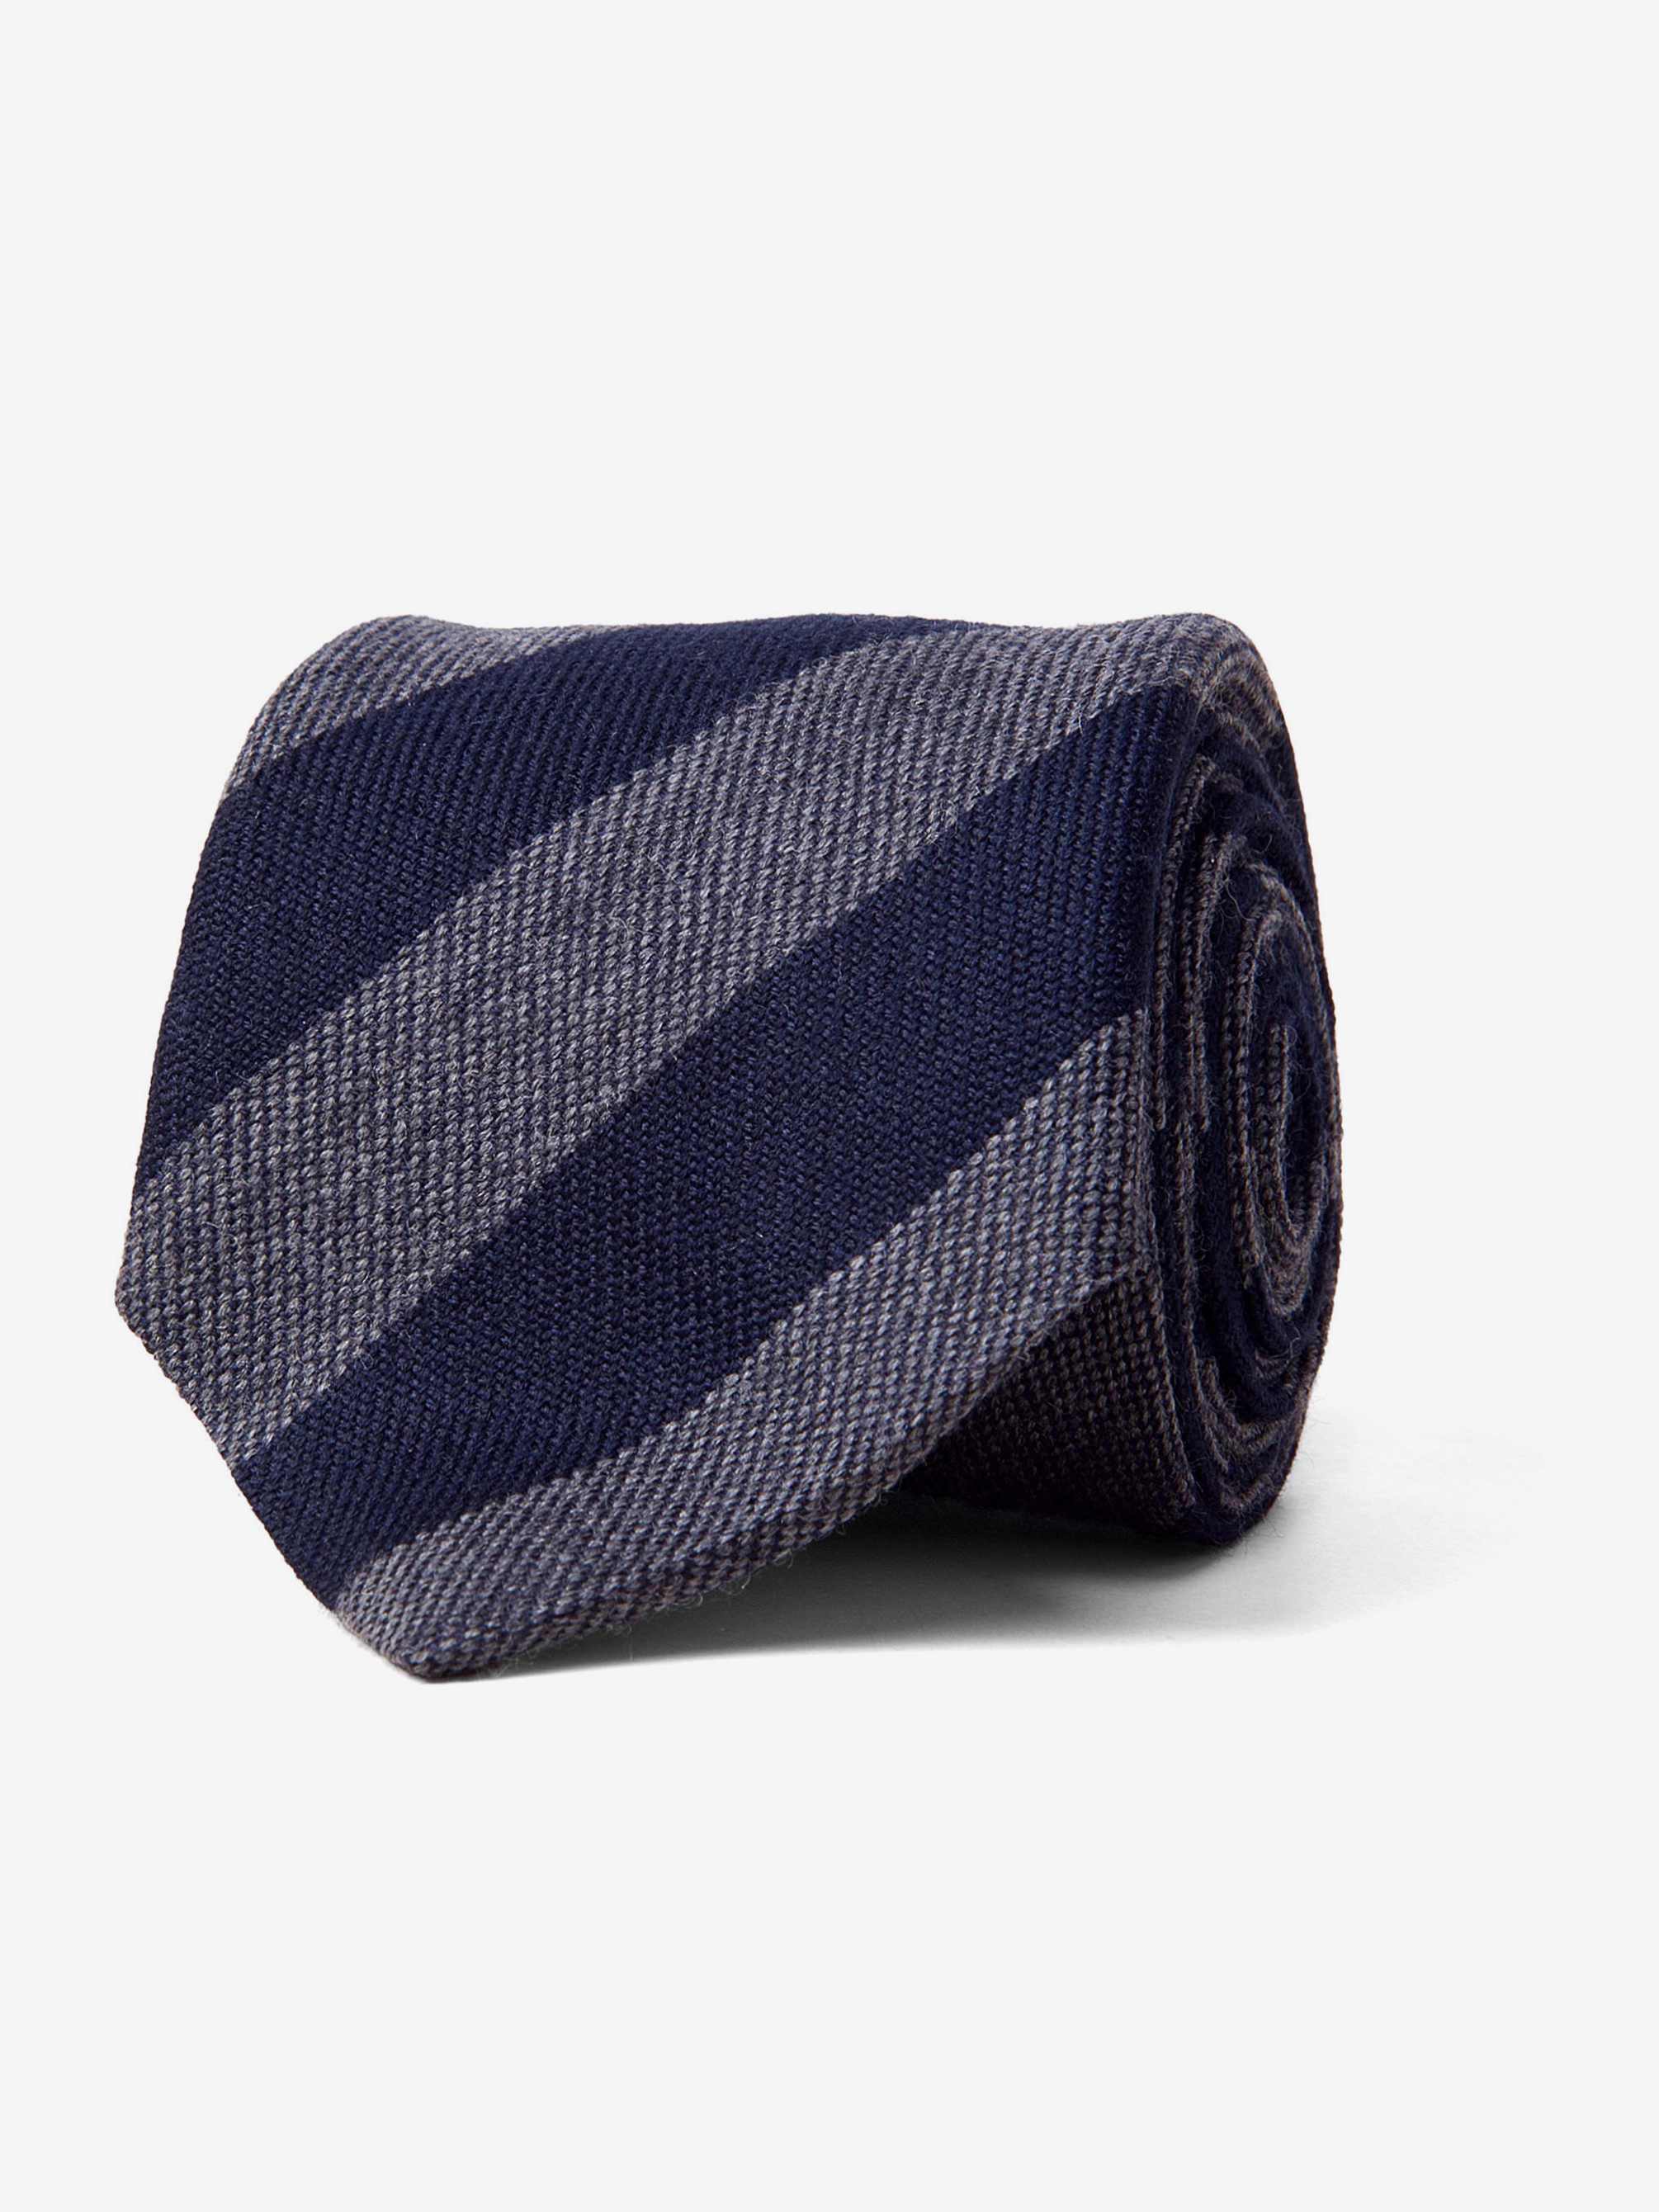 Zoom Image of Navy and Grey Wool Striped Tie